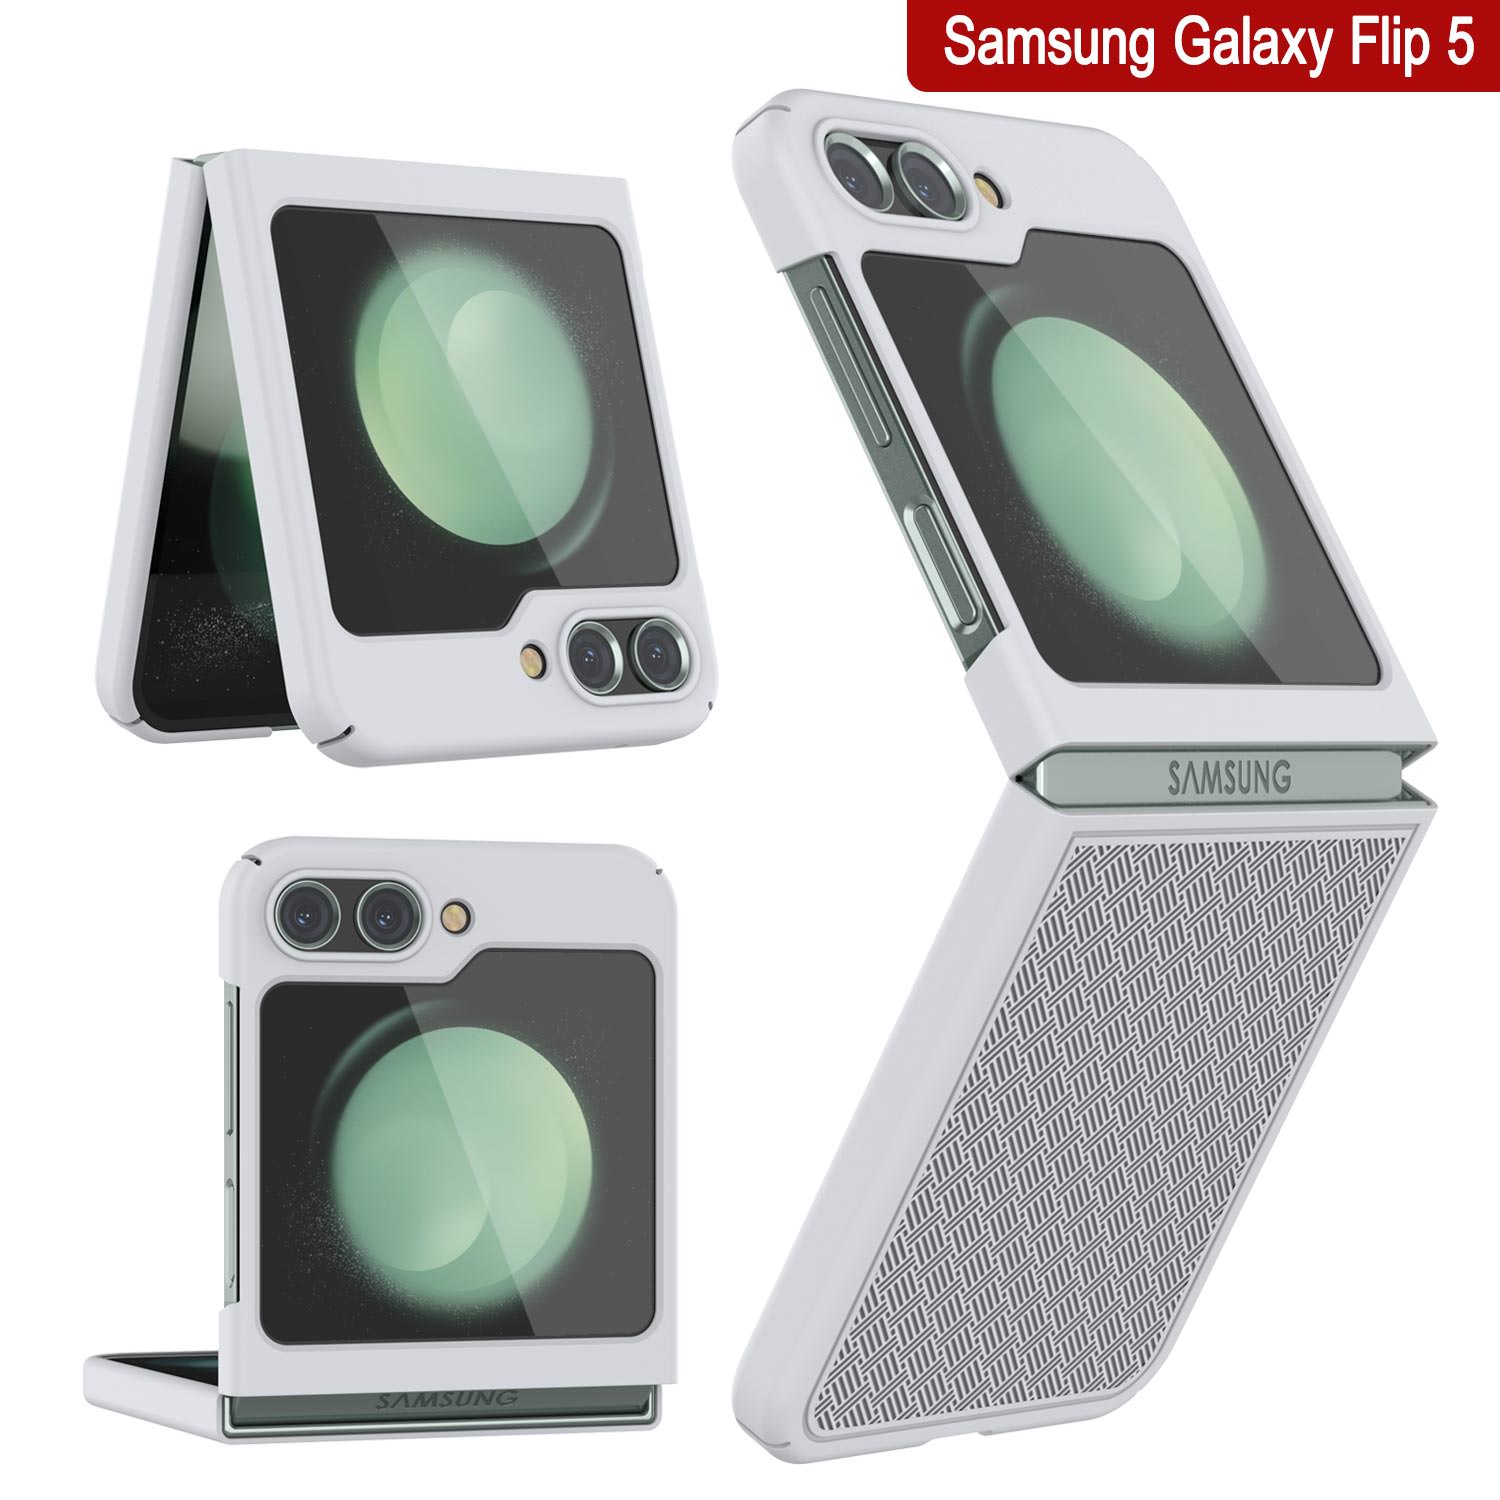 Galaxy Z Flip5 Case With Tempered Glass Screen Protector, Holster Belt Clip & Built-In Kickstand [White]